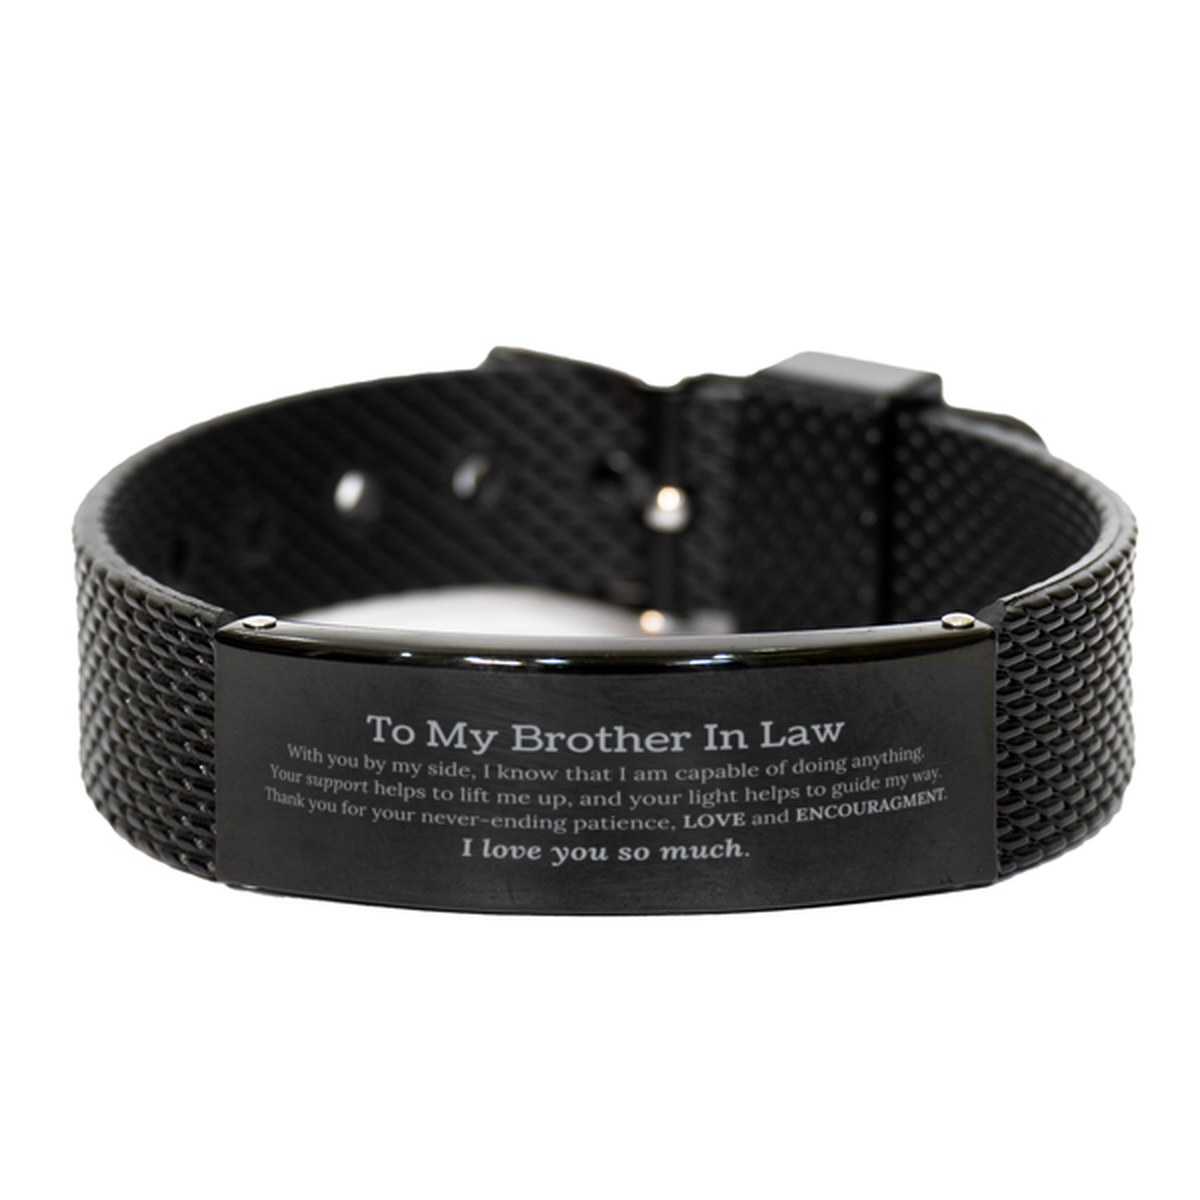 Appreciation Brother In Law Black Shark Mesh Bracelet Gifts, To My Brother In Law Birthday Christmas Wedding Keepsake Gifts for Brother In Law With you by my side, I know that I am capable of doing anything. I love you so much